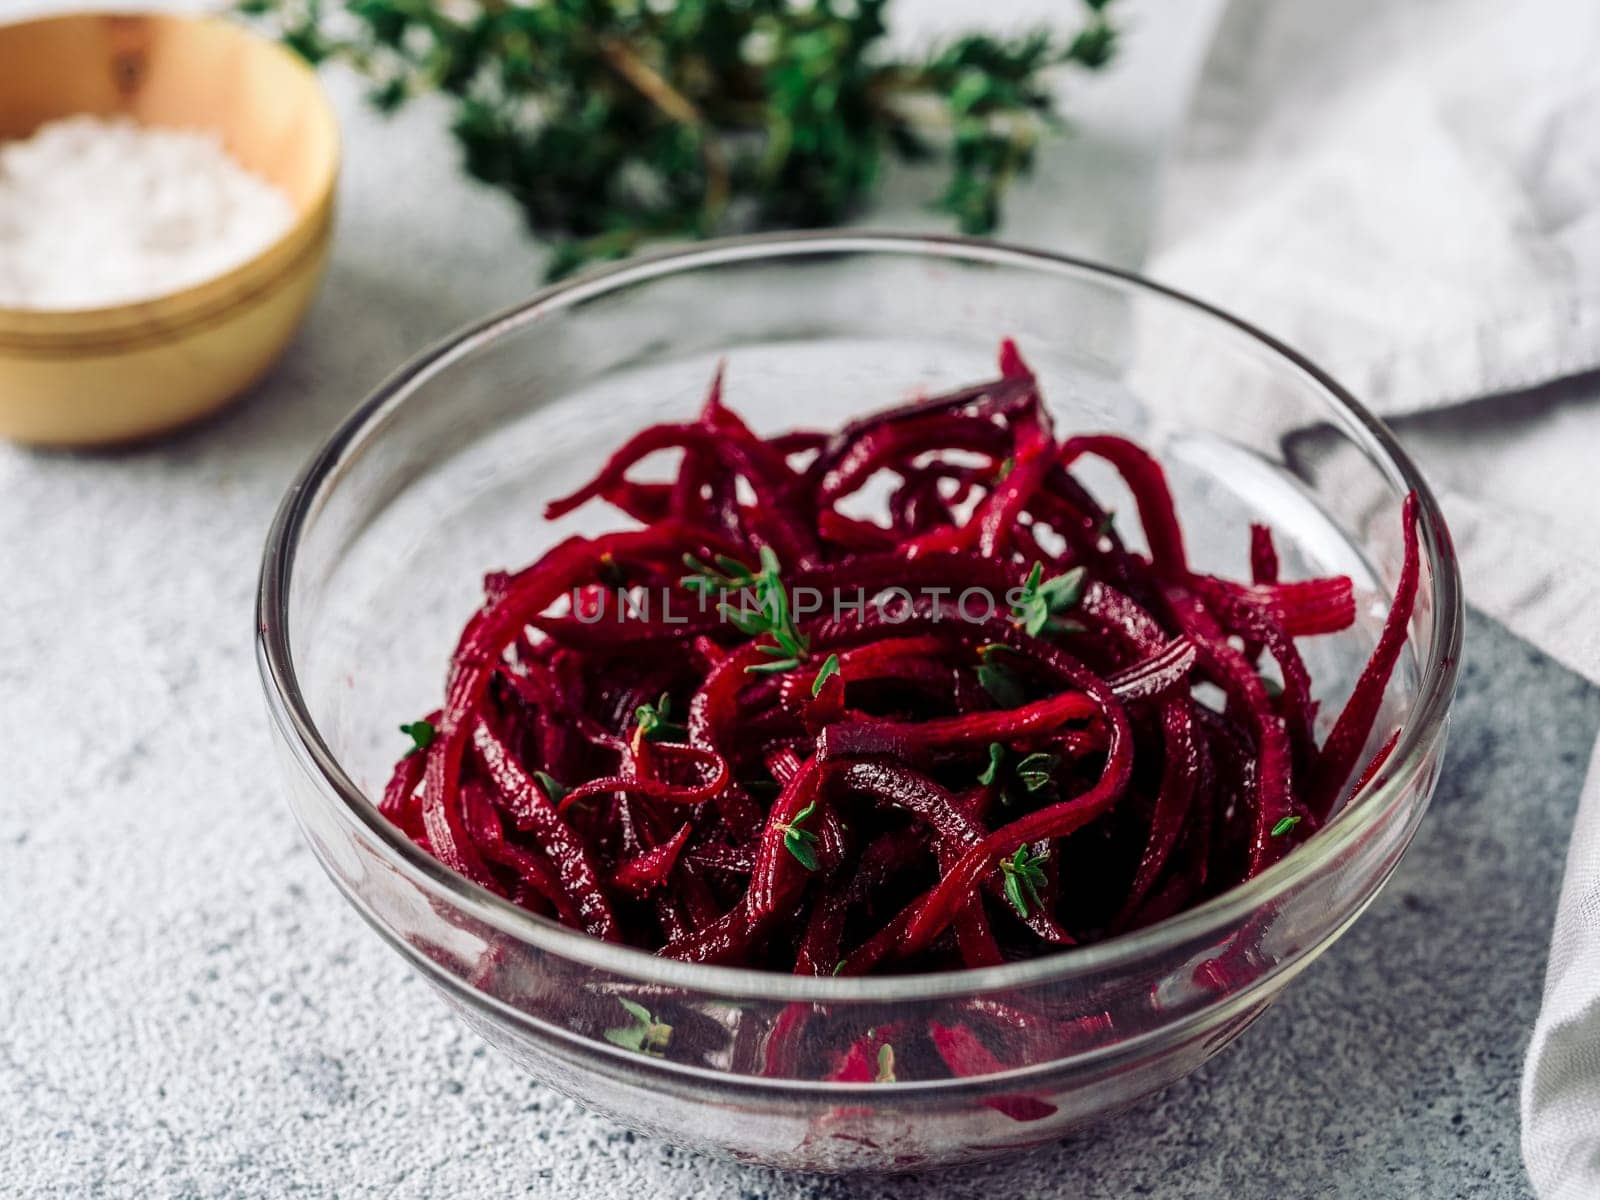 Raw beetroot noodles or beet spaghetti by fascinadora